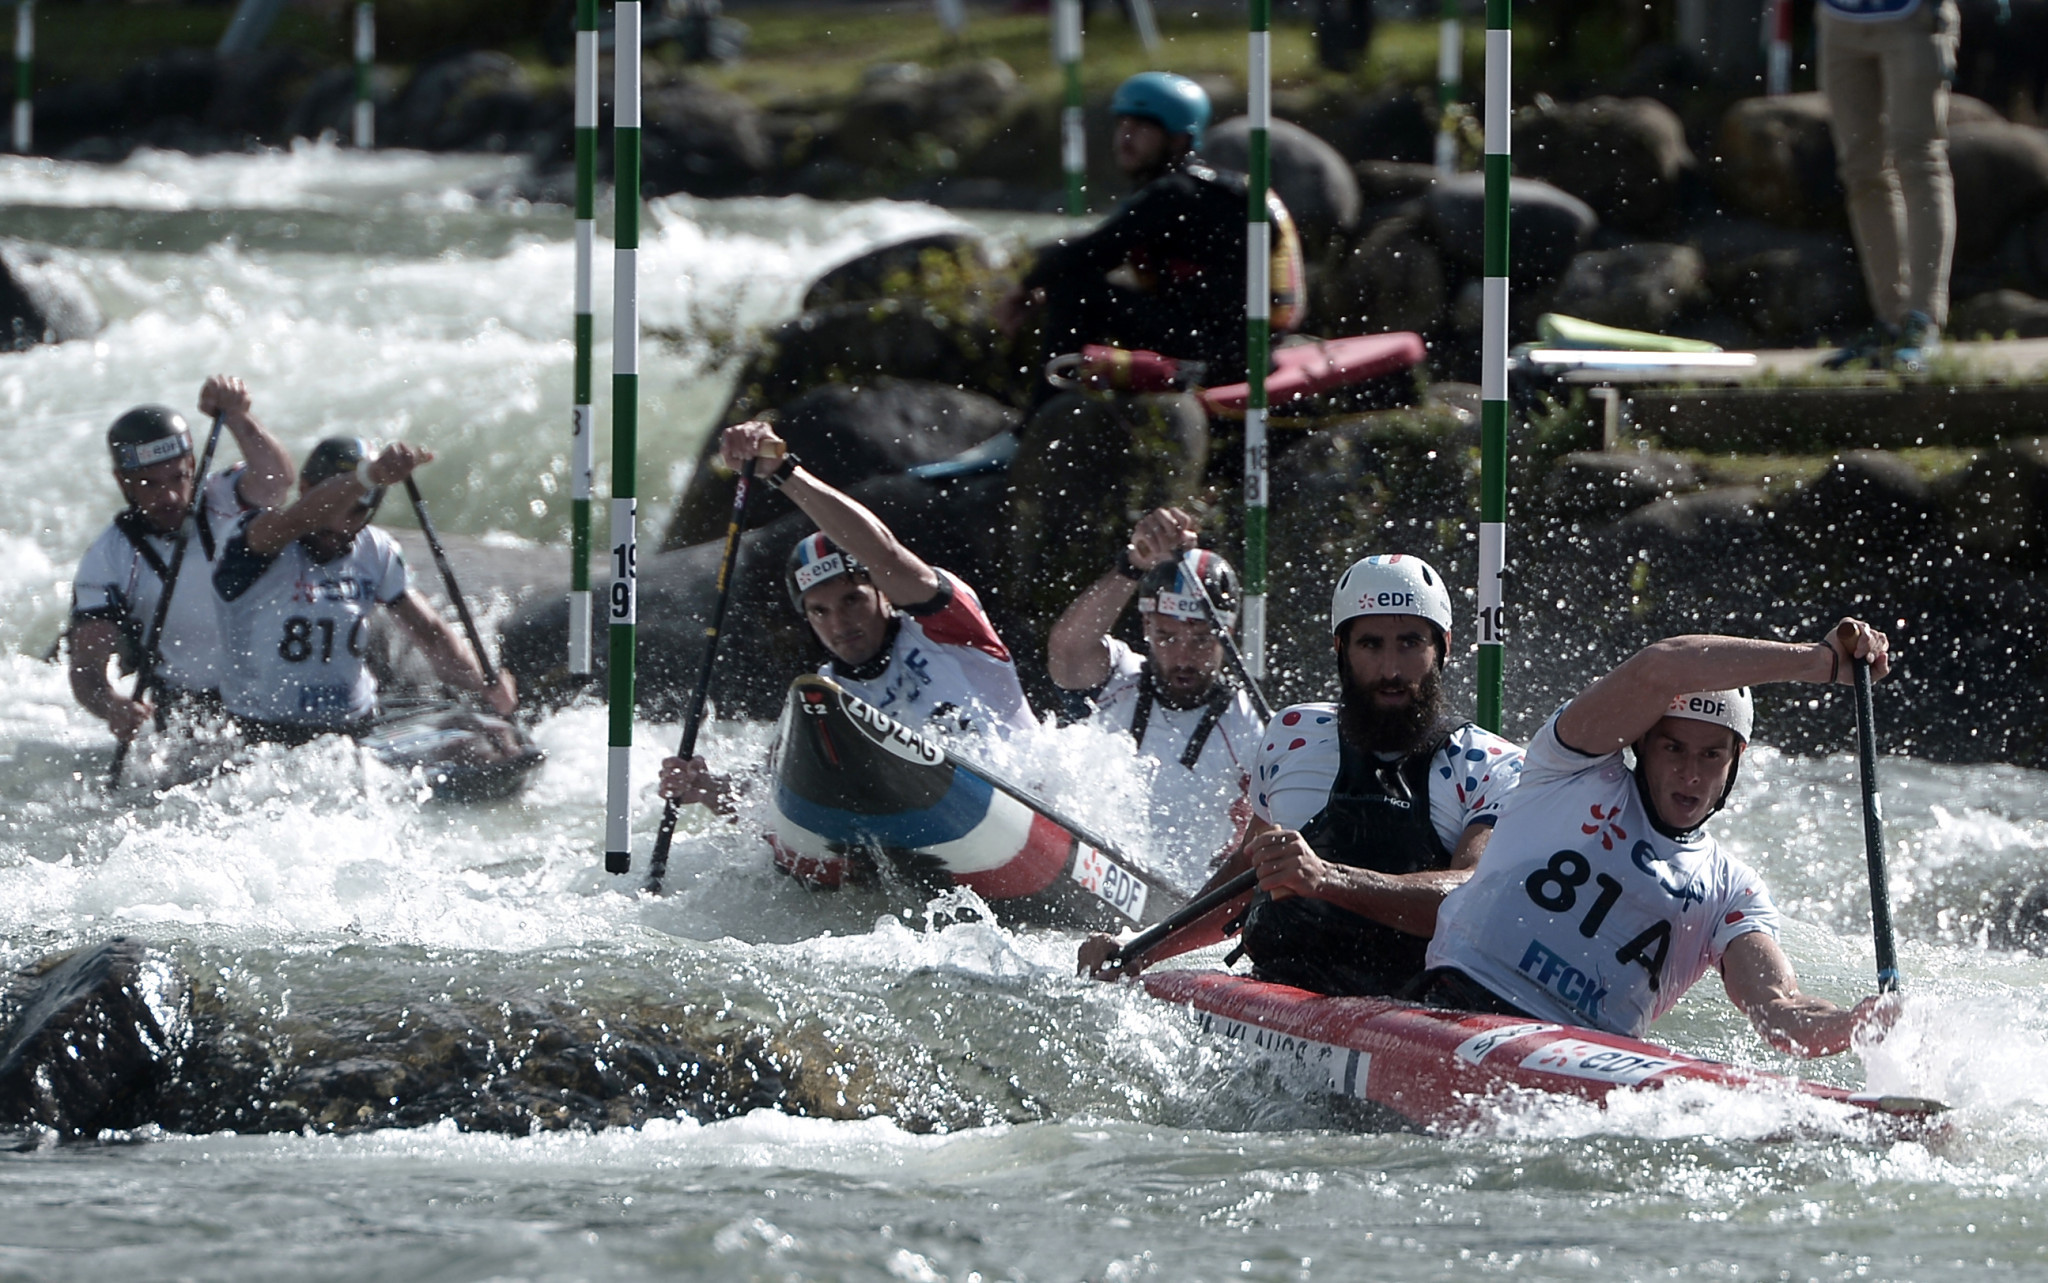 Exclusive: ICF consider new options including extreme slalom for future Games 